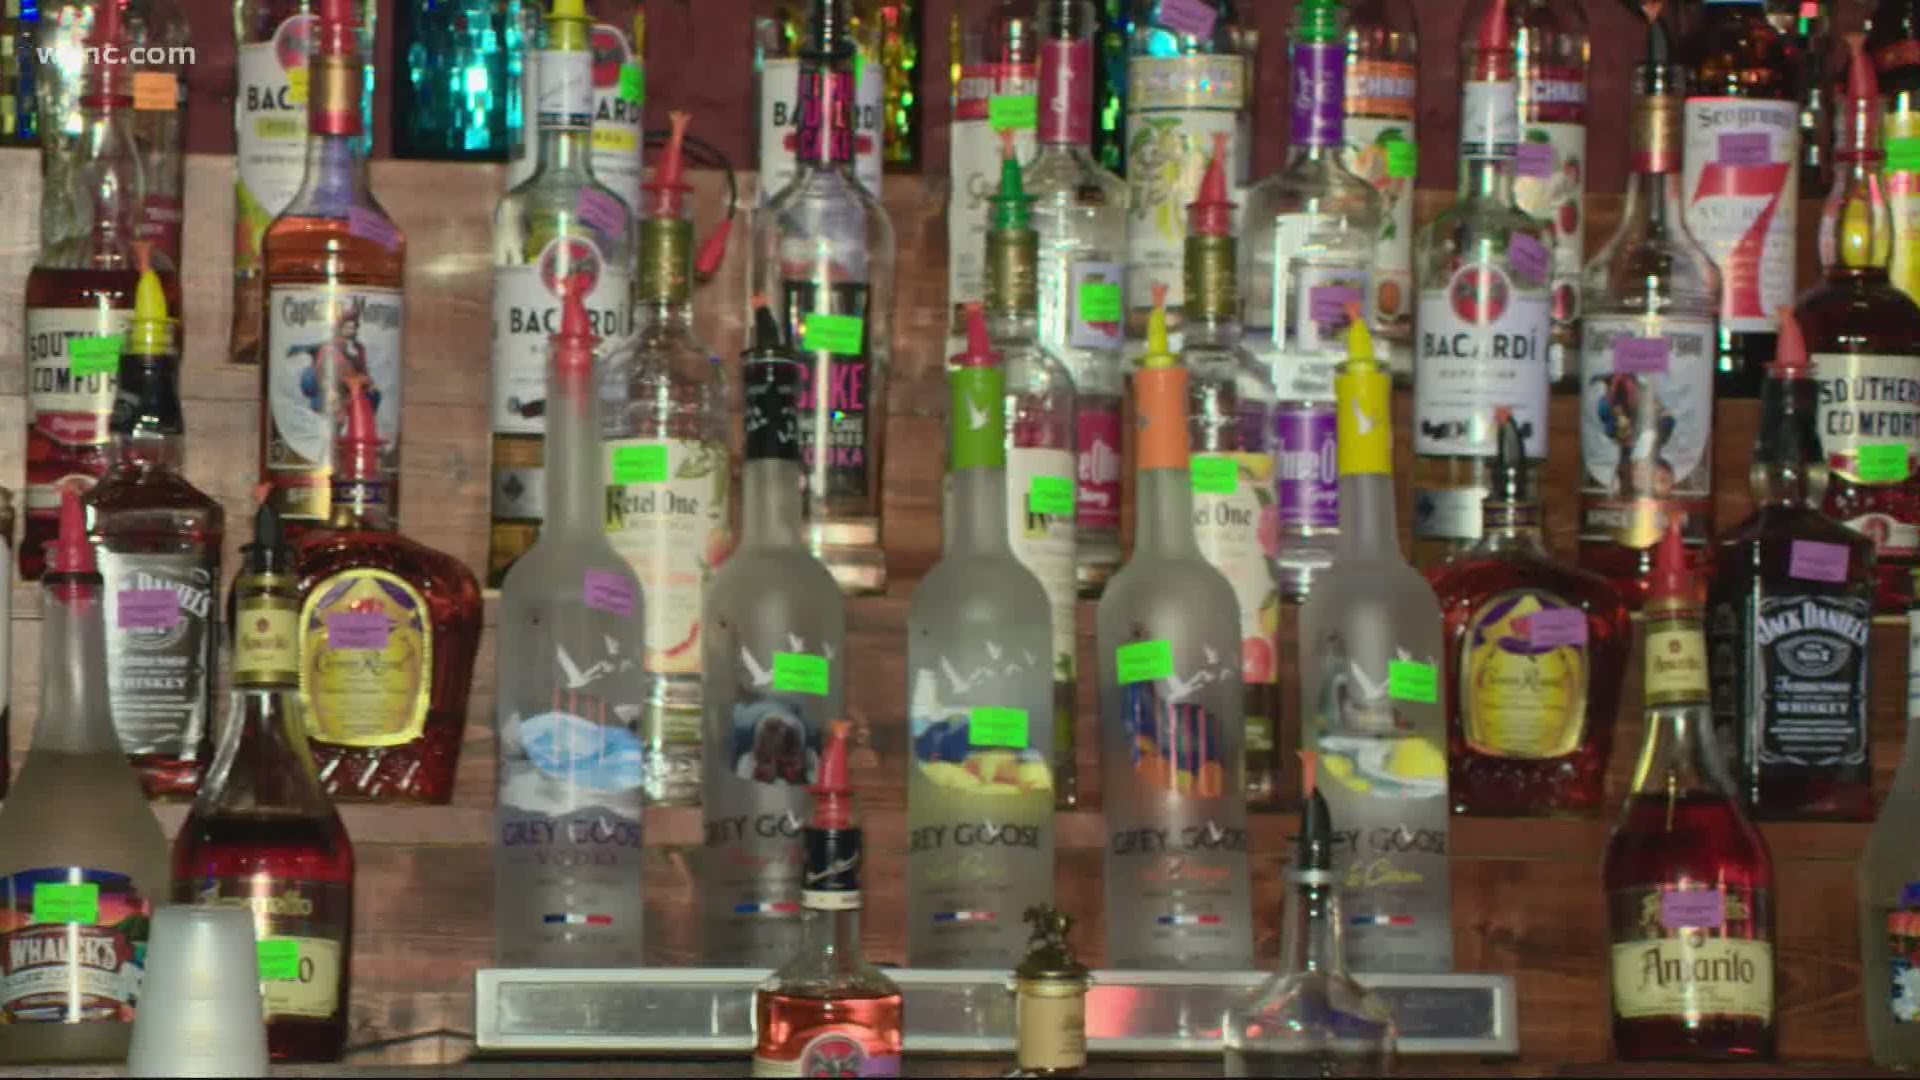 Bars in North Carolina can now sell drinks until 11 p.m. now that Governor Roy Cooper has loosened restrictions.